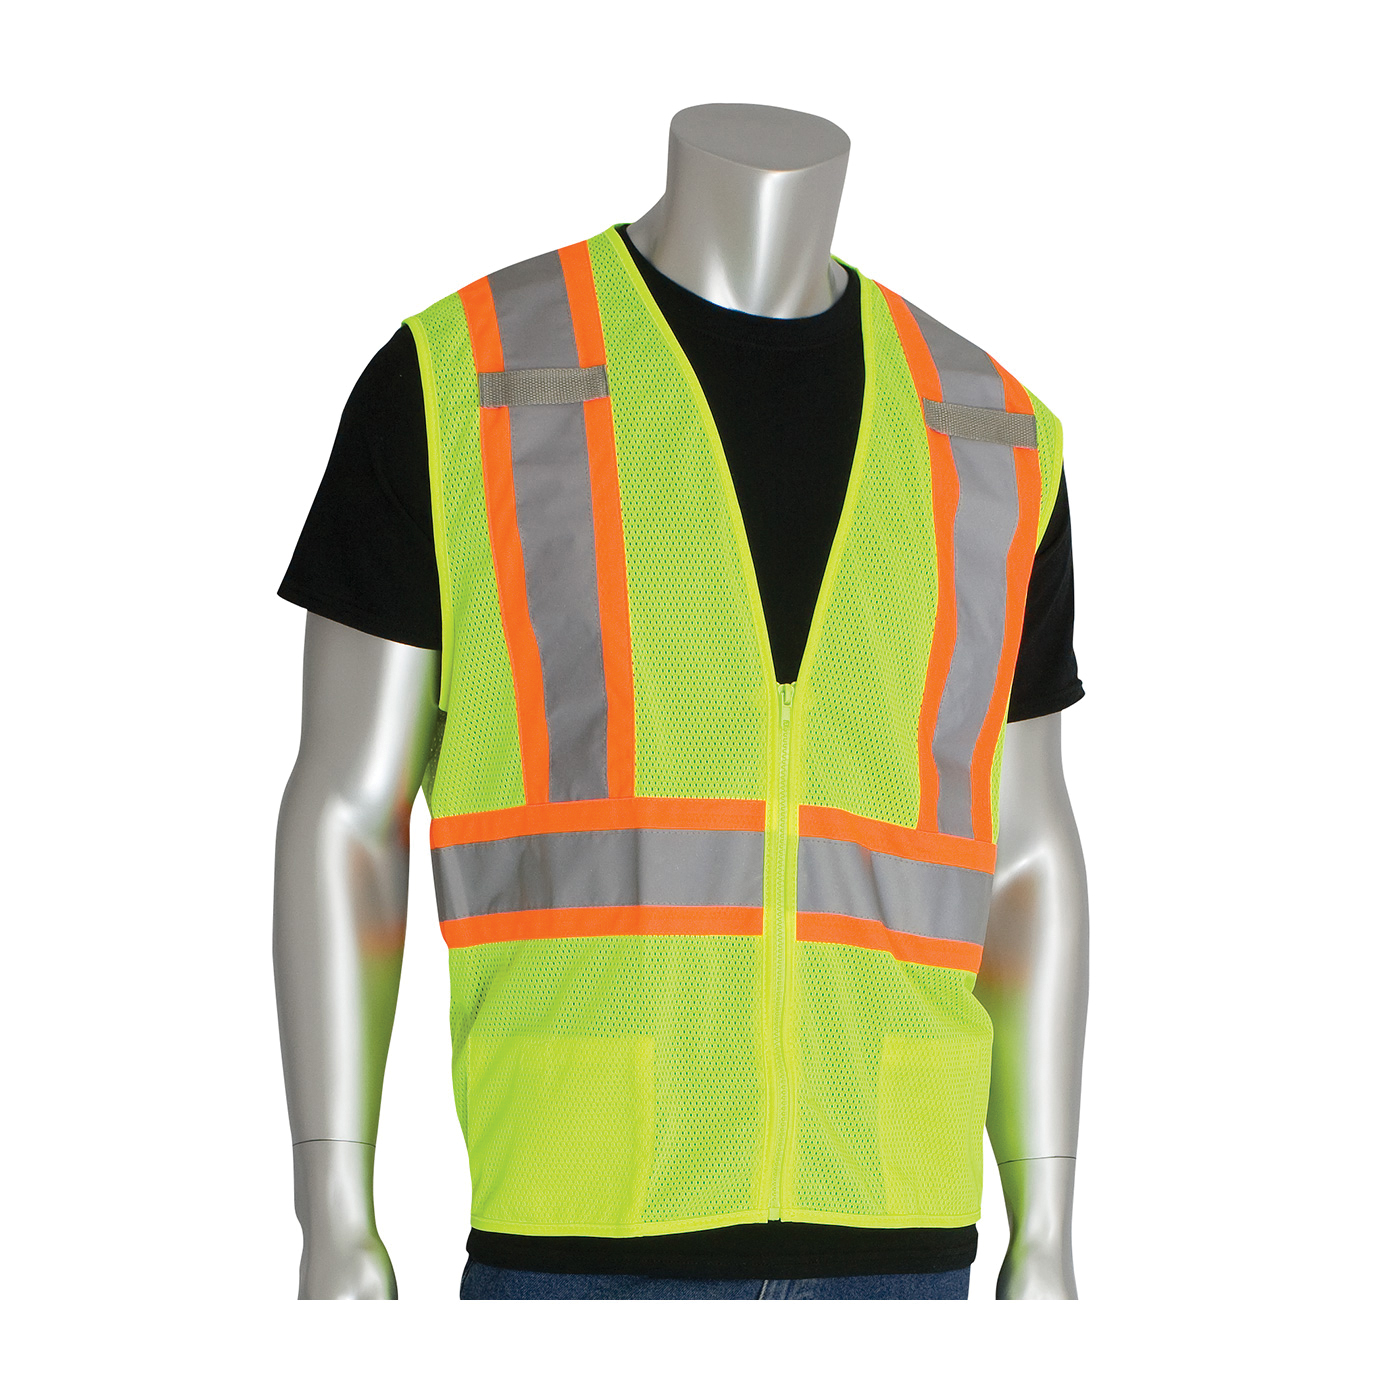 PIP® 302-0600D-LY/2X 2-Tone Safety Access Vest With "D" Ring Access, 2XL, Hi-Viz Lime Yellow, Polyester, Zipper Closure, 2 Pockets, ANSI Class: Class 2, Specifications Met: ANSI 107 Type R